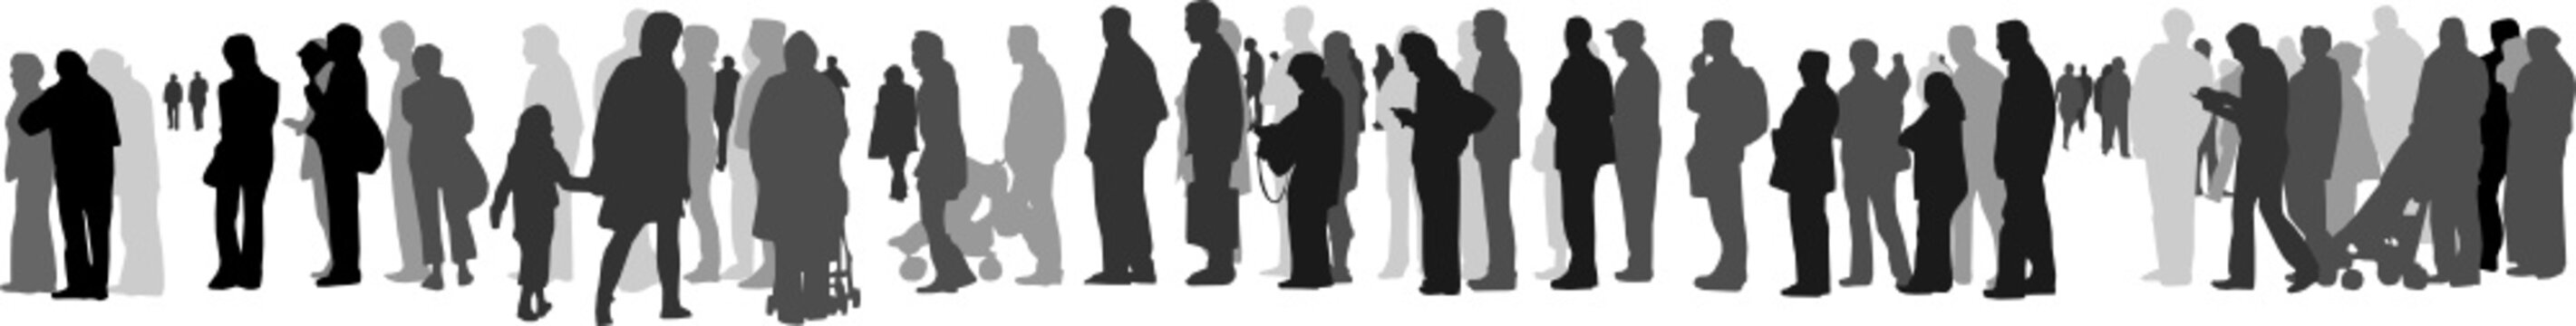 people waiting in queue silhouette vector